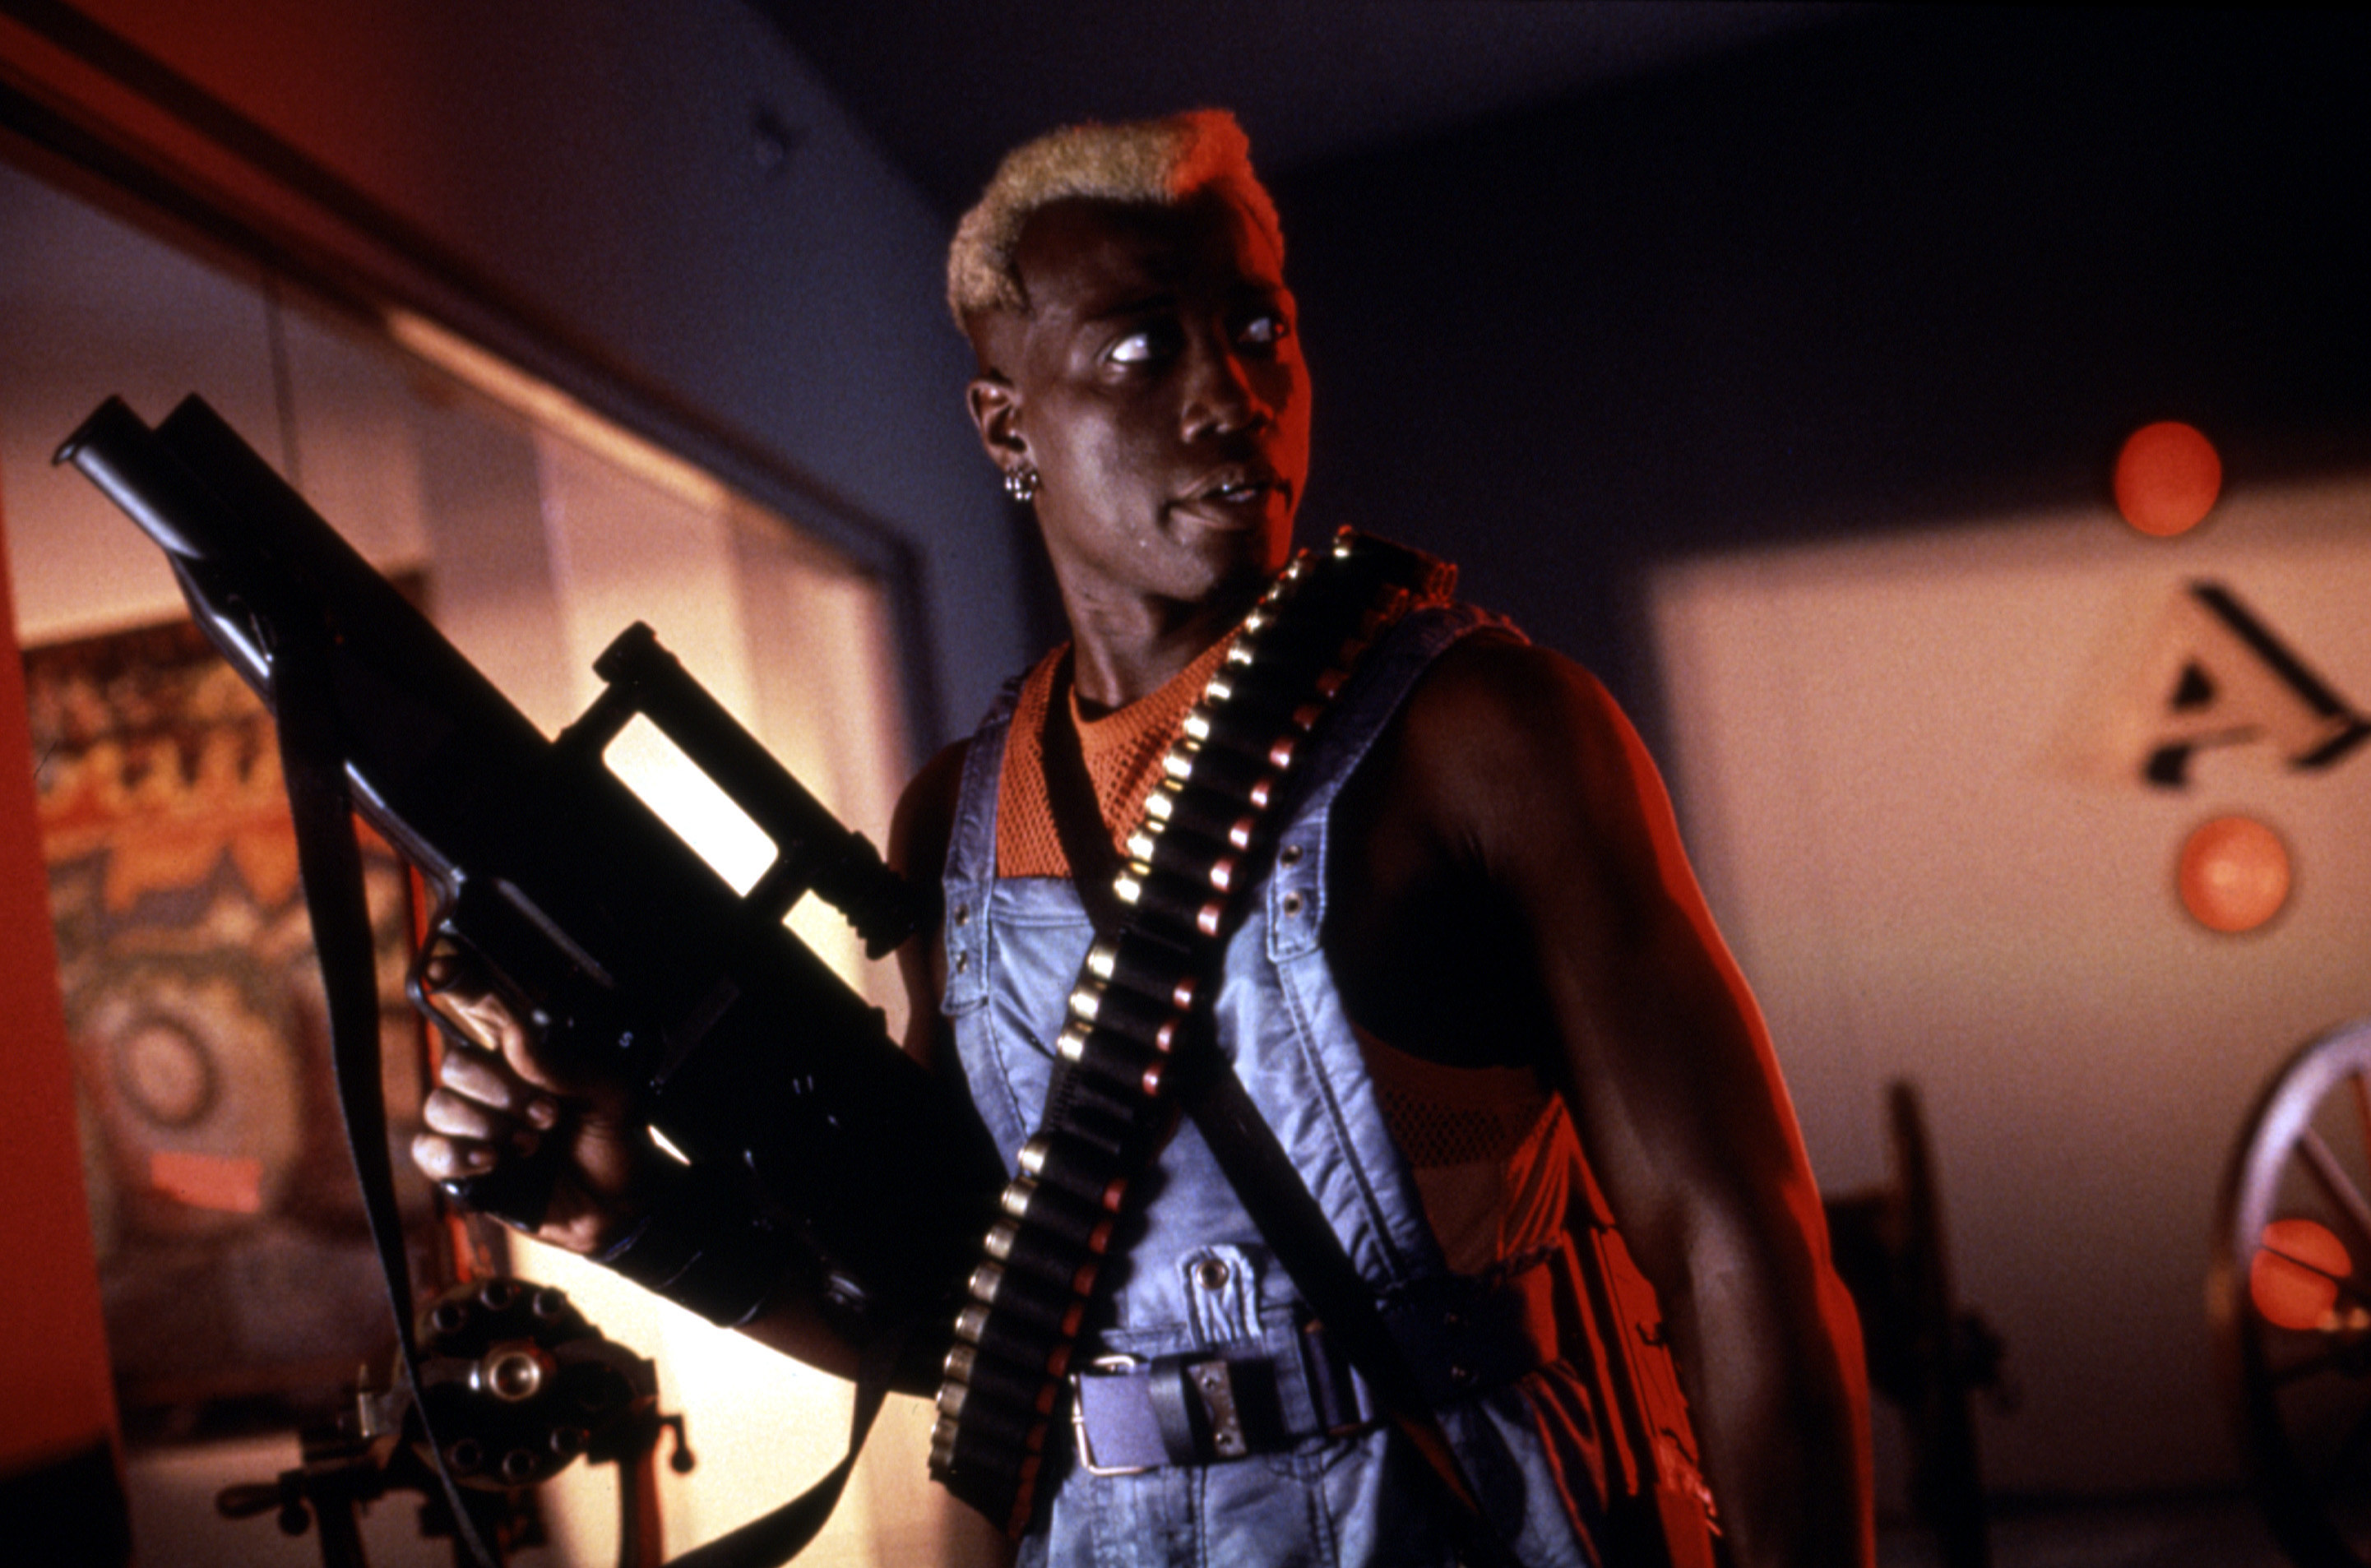 A man with bleached hair holds and massive gun